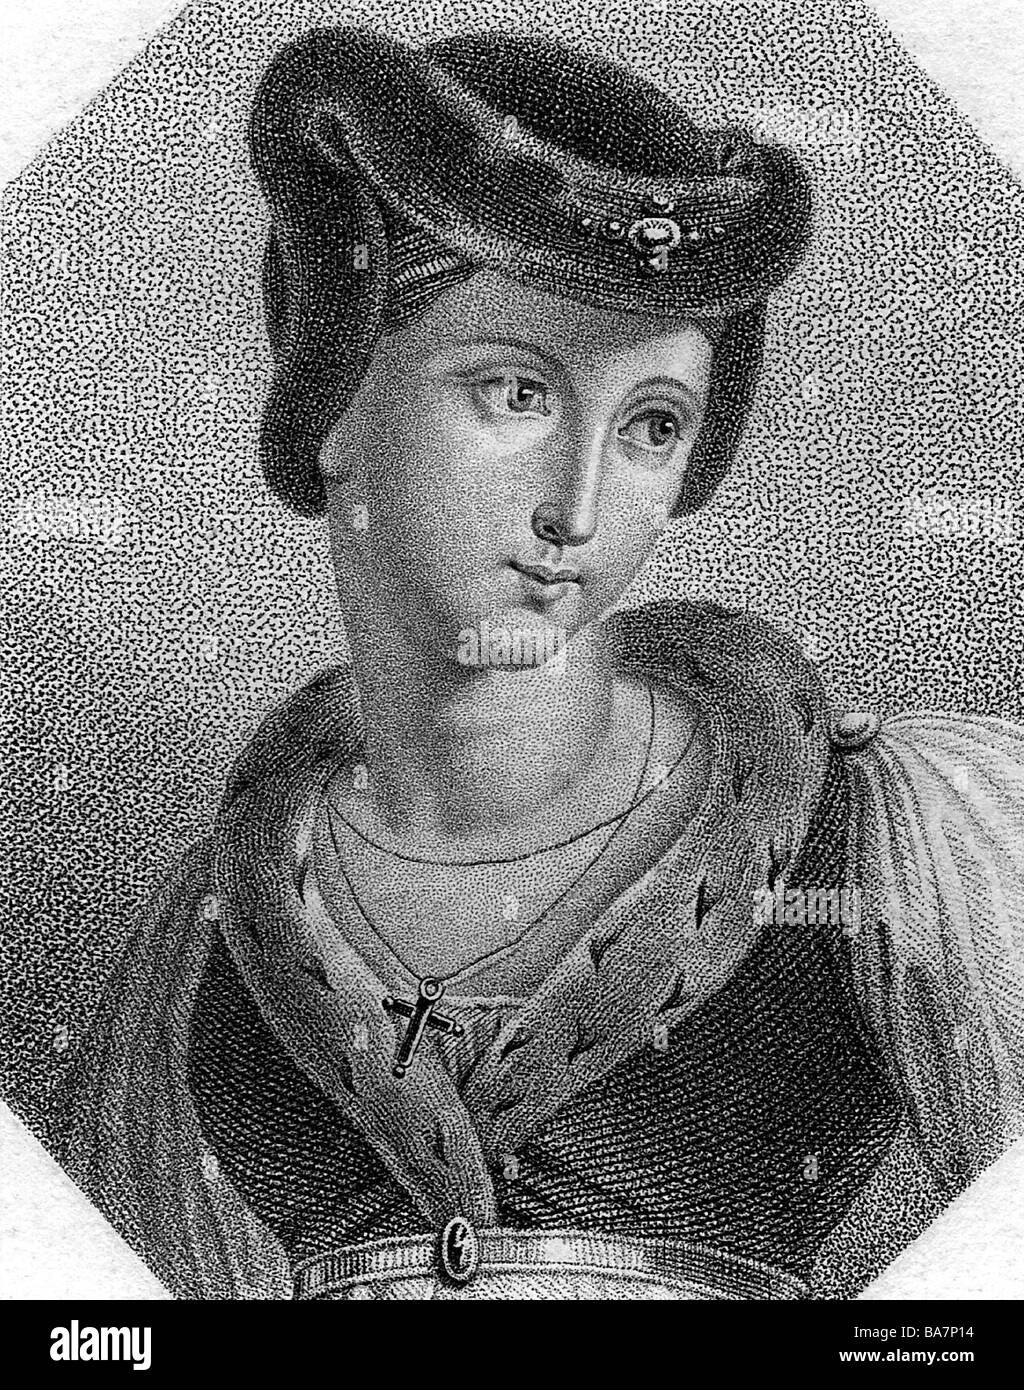 Sorel (Soreau), Agnes, circa 1421 - 9.2.1450, mistress of King Charles VII of France, portrait, copper engraving by C.T. Riedel after drawing by A. Desenne, octagonal, 9 x 7 cm, Artist's Copyright has not to be cleared Stock Photo